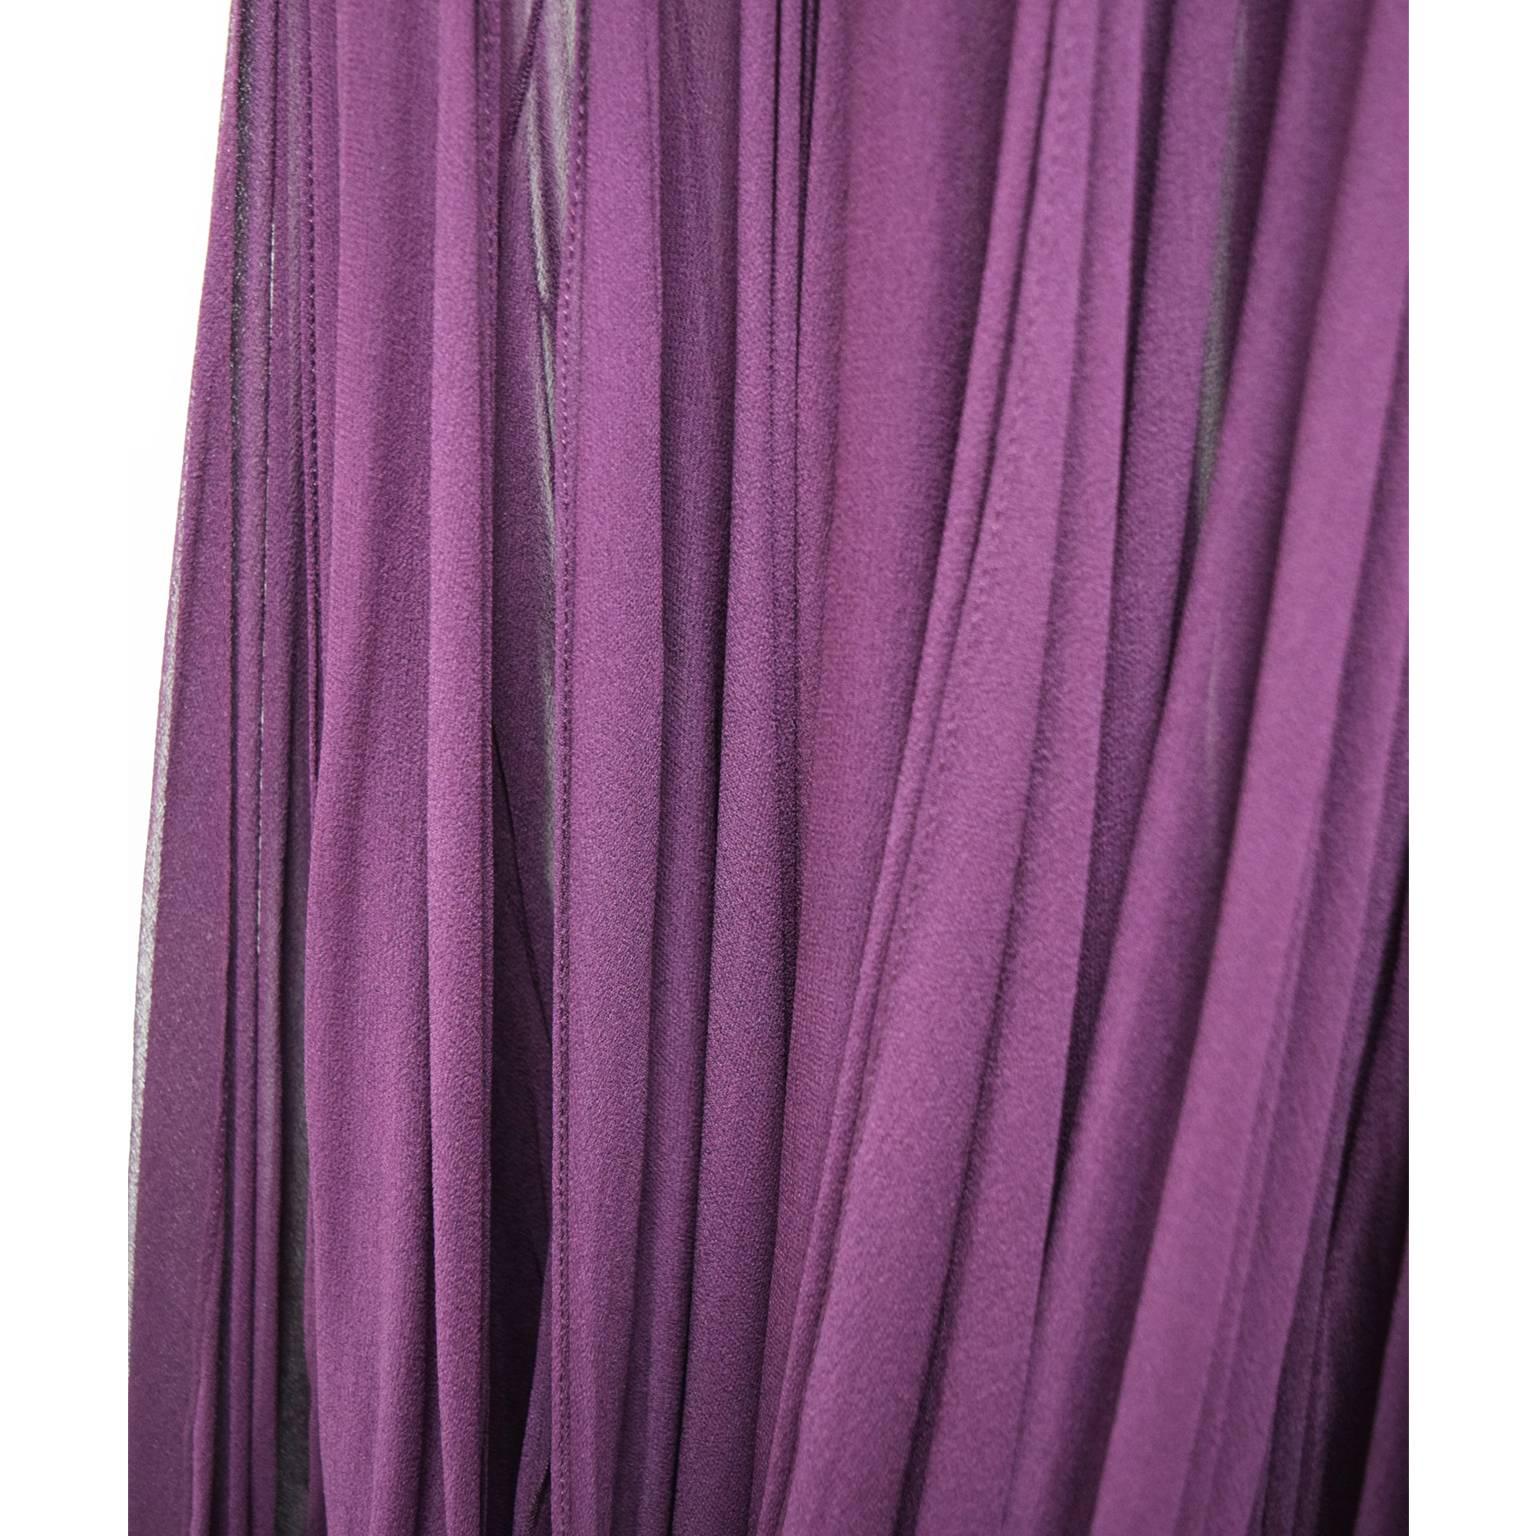 Herve Leger Merlot Banded Bodice with Carwash Silk Skirt Gown For Sale 1